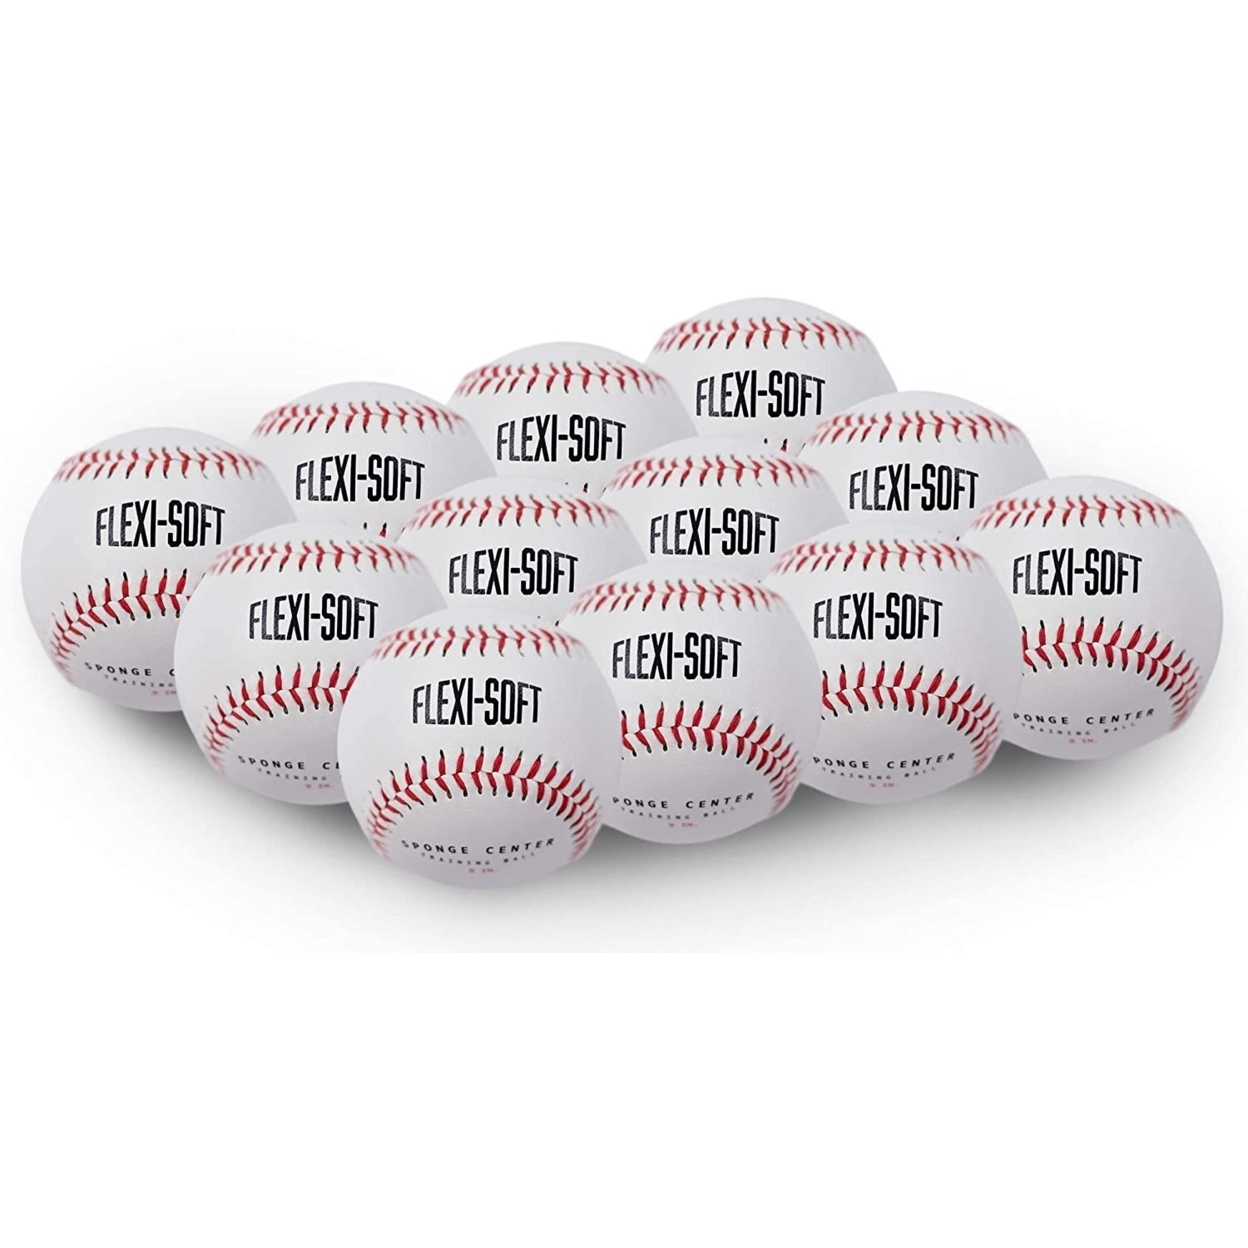 PowerNet Flexi Soft Baseballs 12-Pack Great For Training And Coaching (1140-1)